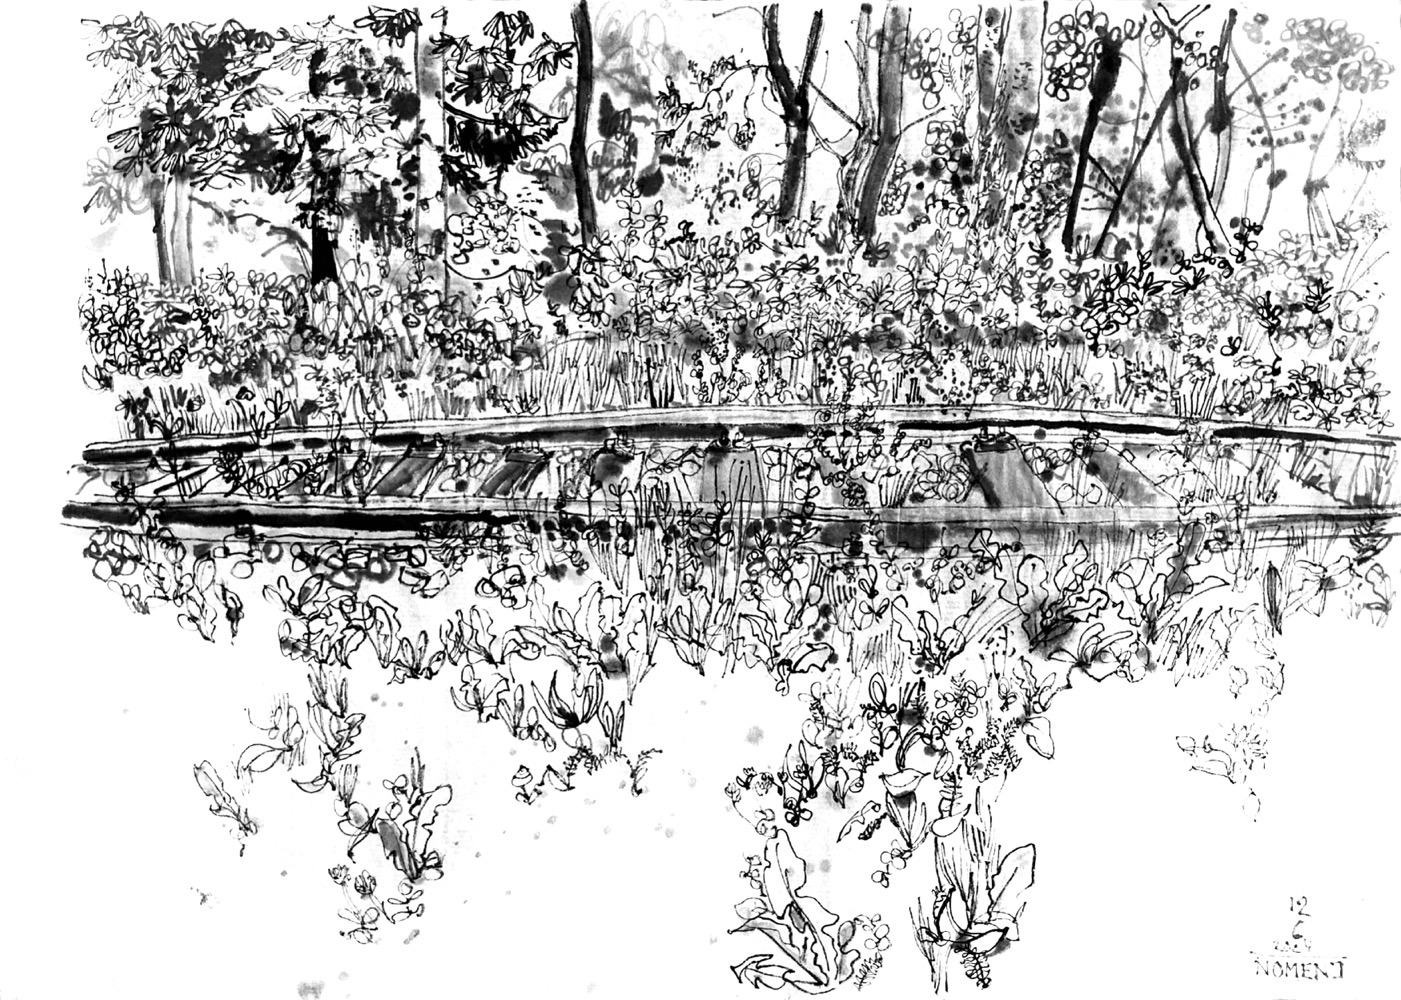 Ink drawing of single rails, trees etc. in the back.